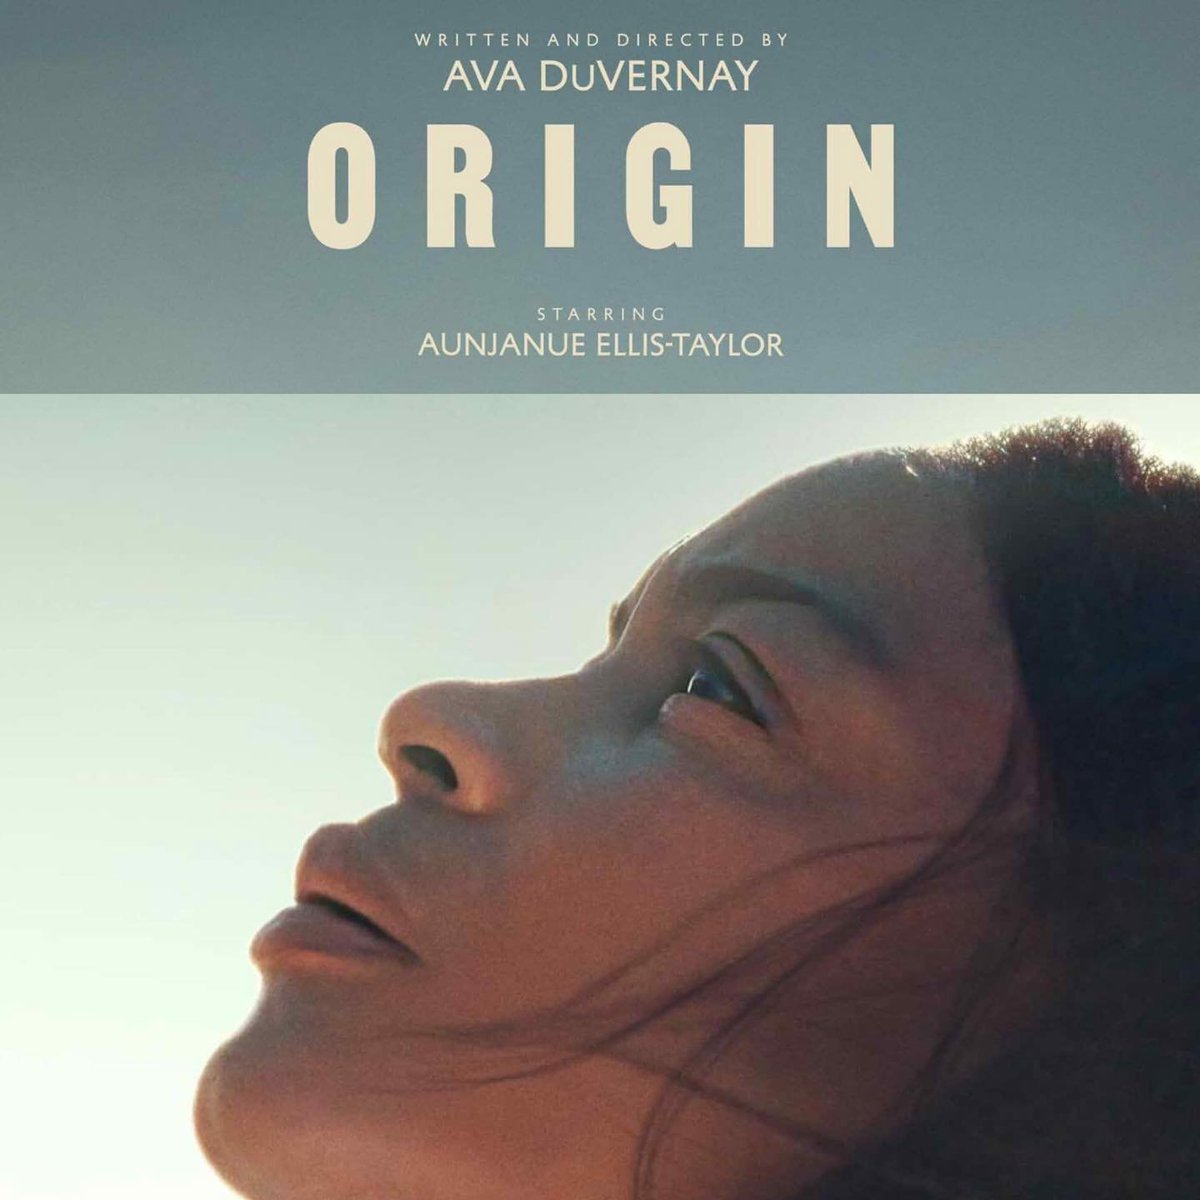 The unspoken system that has shaped America and chronicles how lives today are defined by a hierarchy of human divisions.
#origin #avaduvernay #aunjanueellis #drama #history #primevideo  #films #moviemagicwithbrian #foryou #foryourpage #foryoupage #movies #movie